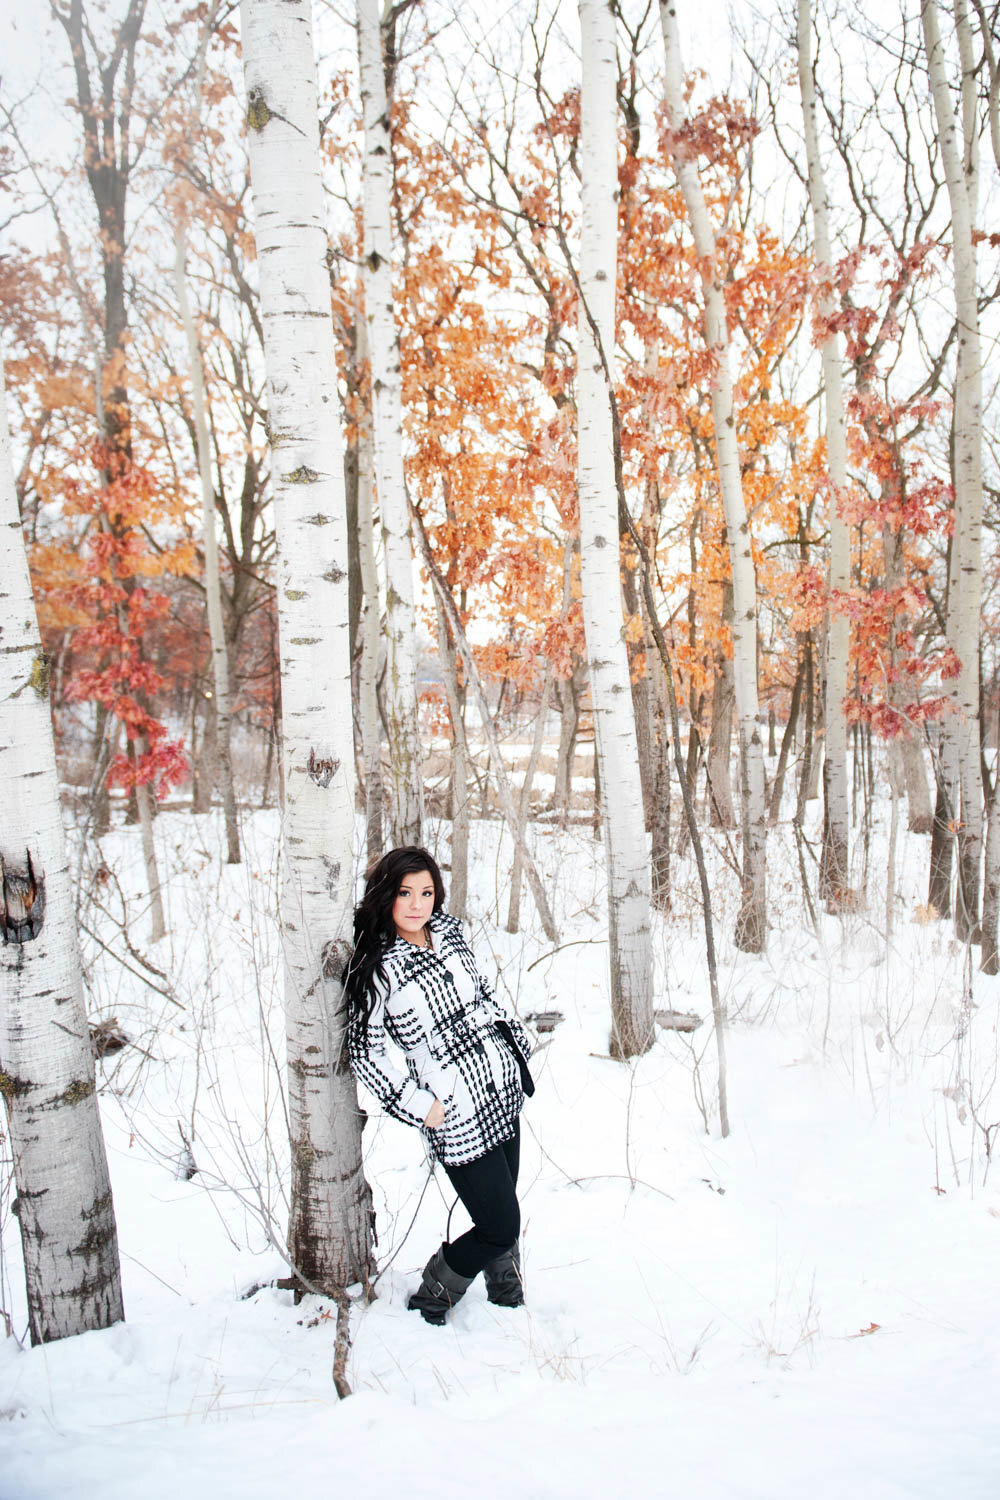 senior photo of girl in black and white jacket in the snow with birch trees